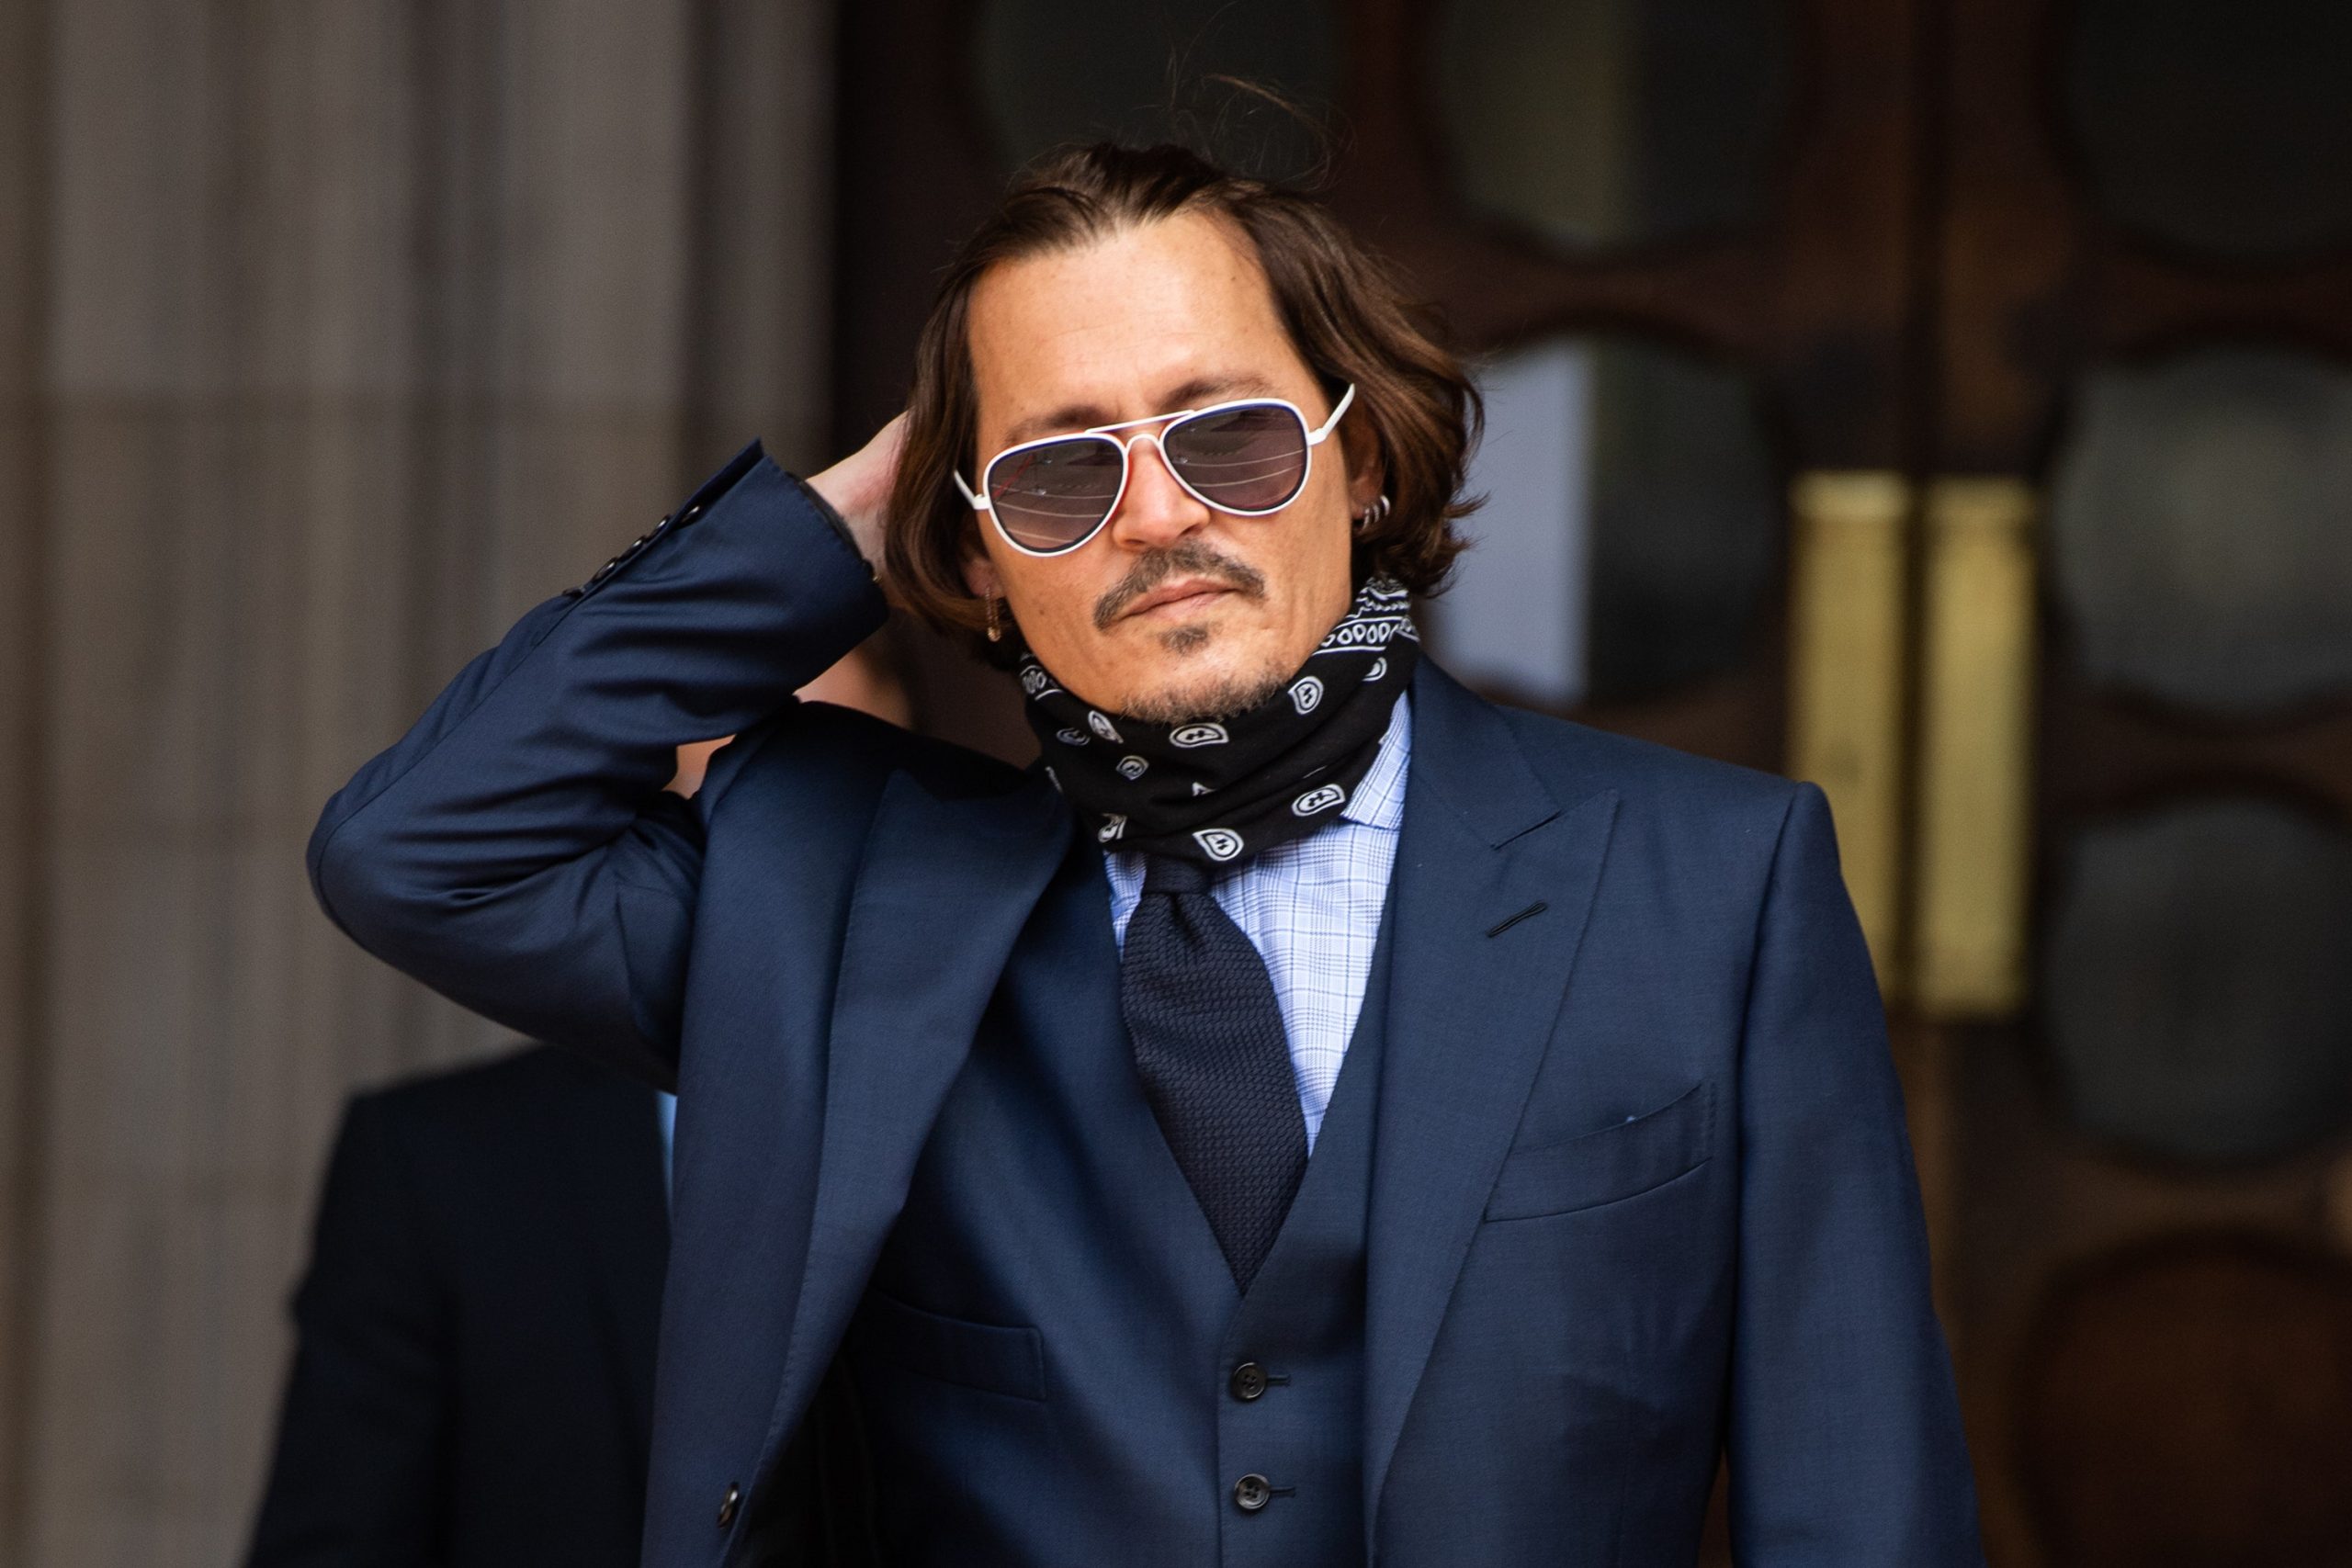 Johnny Depp Wiki, Bio, Age, Net Worth, and Other Facts - FactsFive